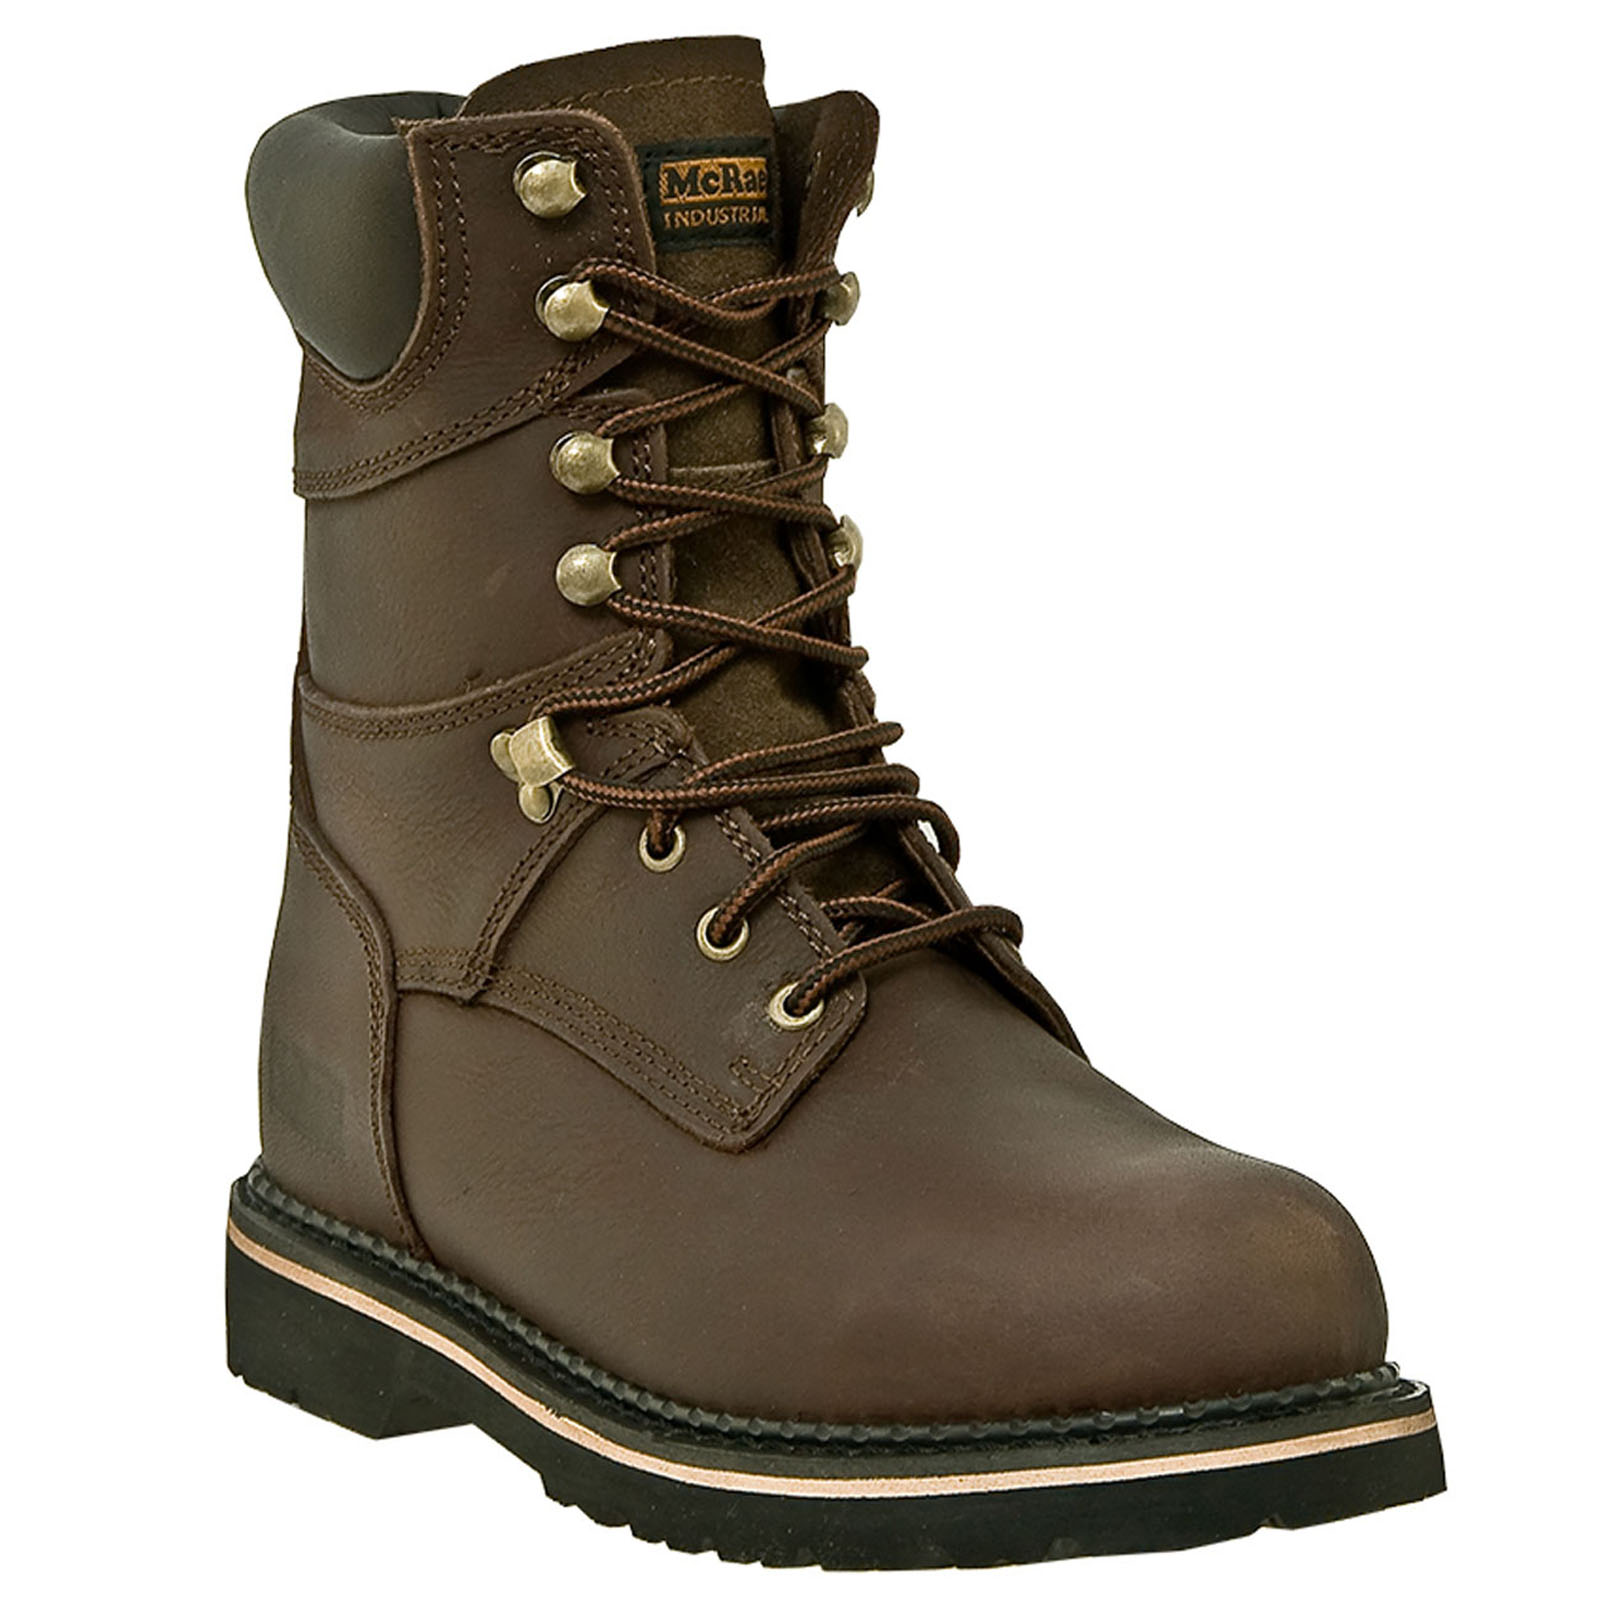 McRae Industrial Men's 8" Leather Slip Resistant Soft Toe Work Boot Wide Width Available - Brown